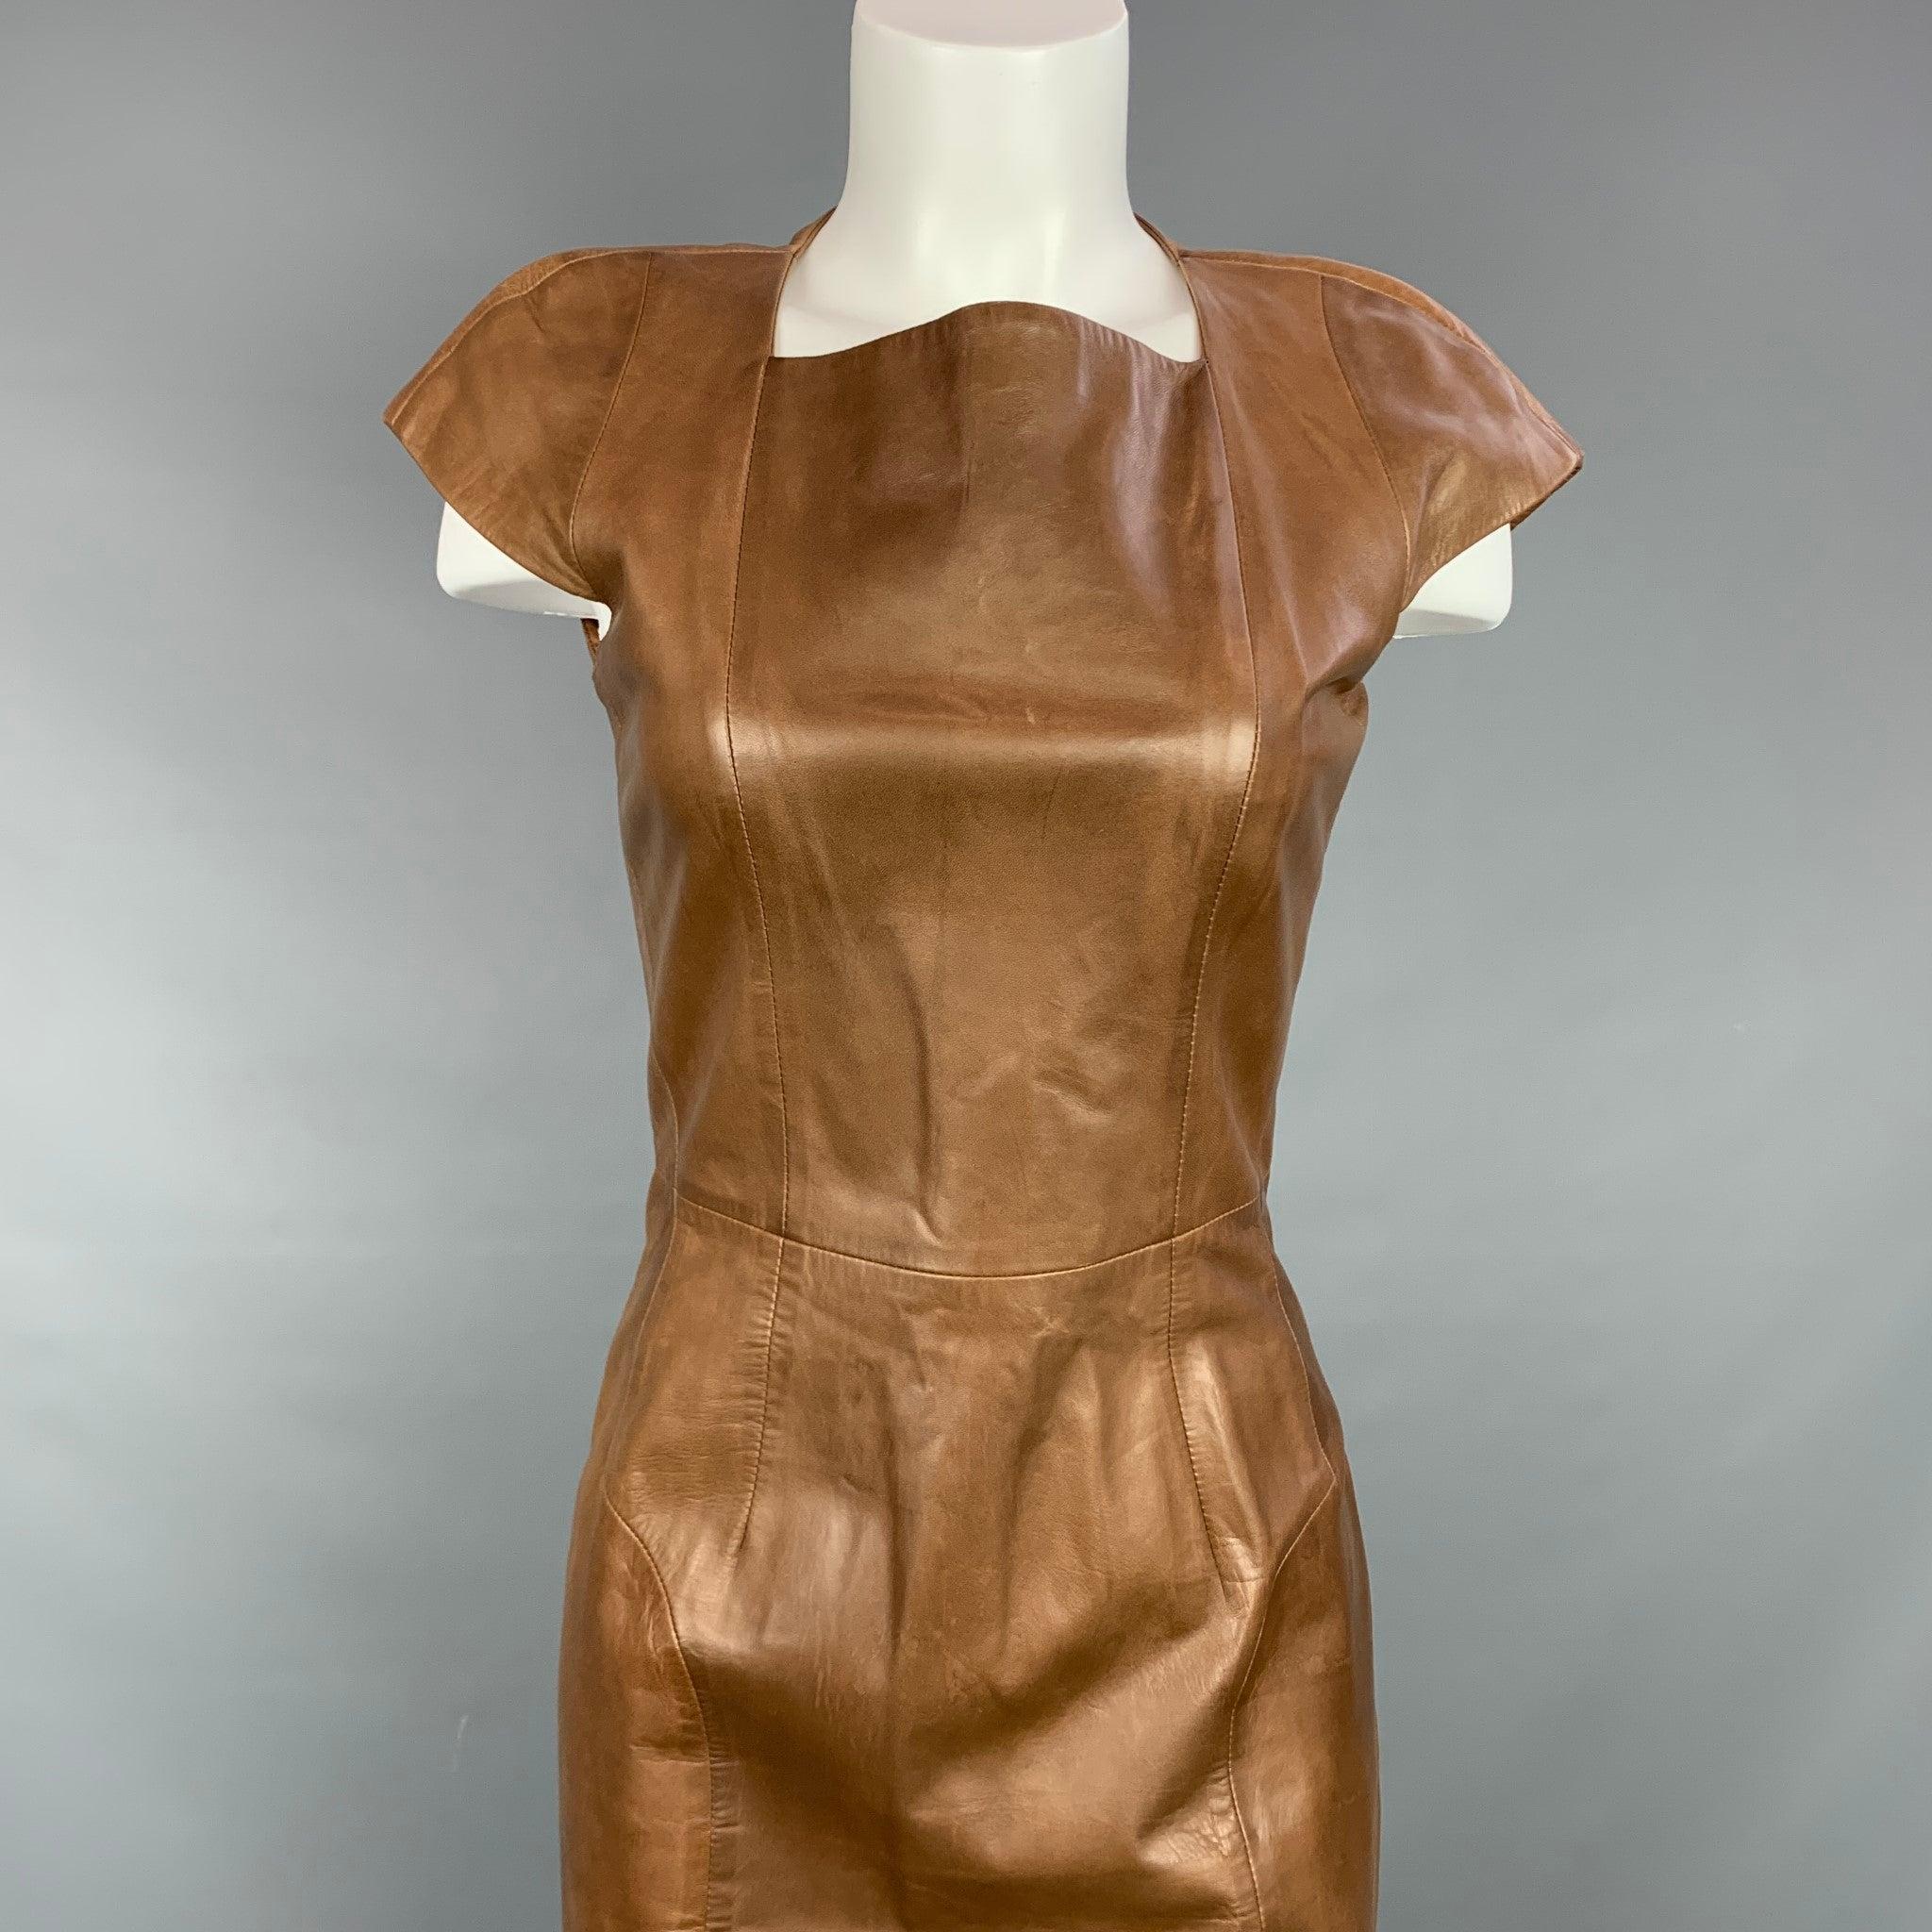 YVES SAINT LAURENT dress comes in a tan leather with a full liner featuring a shift style, cap sleeves, top stitching, and a back zip up closure. Made in Italy.
Very Good
Pre-Owned Condition. 

Marked:   38 

Measurements: 
 
Shoulder: 19 inches 